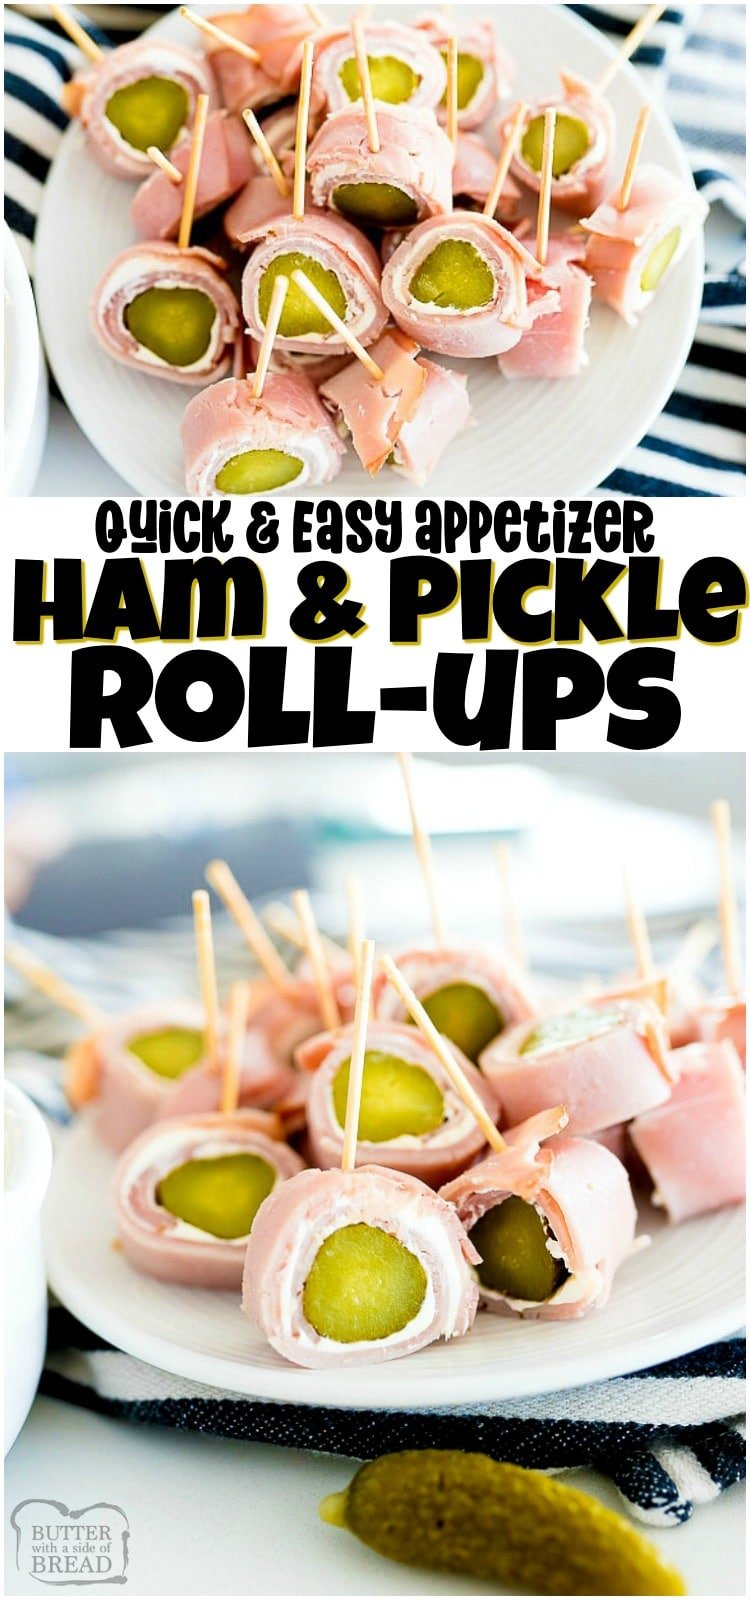 Ham and Pickle Roll Ups are a delicious and filling appetizer or could be used in lieu of lunch! The ham is topped with a garlic herb cream cheese spread then rolled up with a pickle inside. This simple appetizer is always a hit!